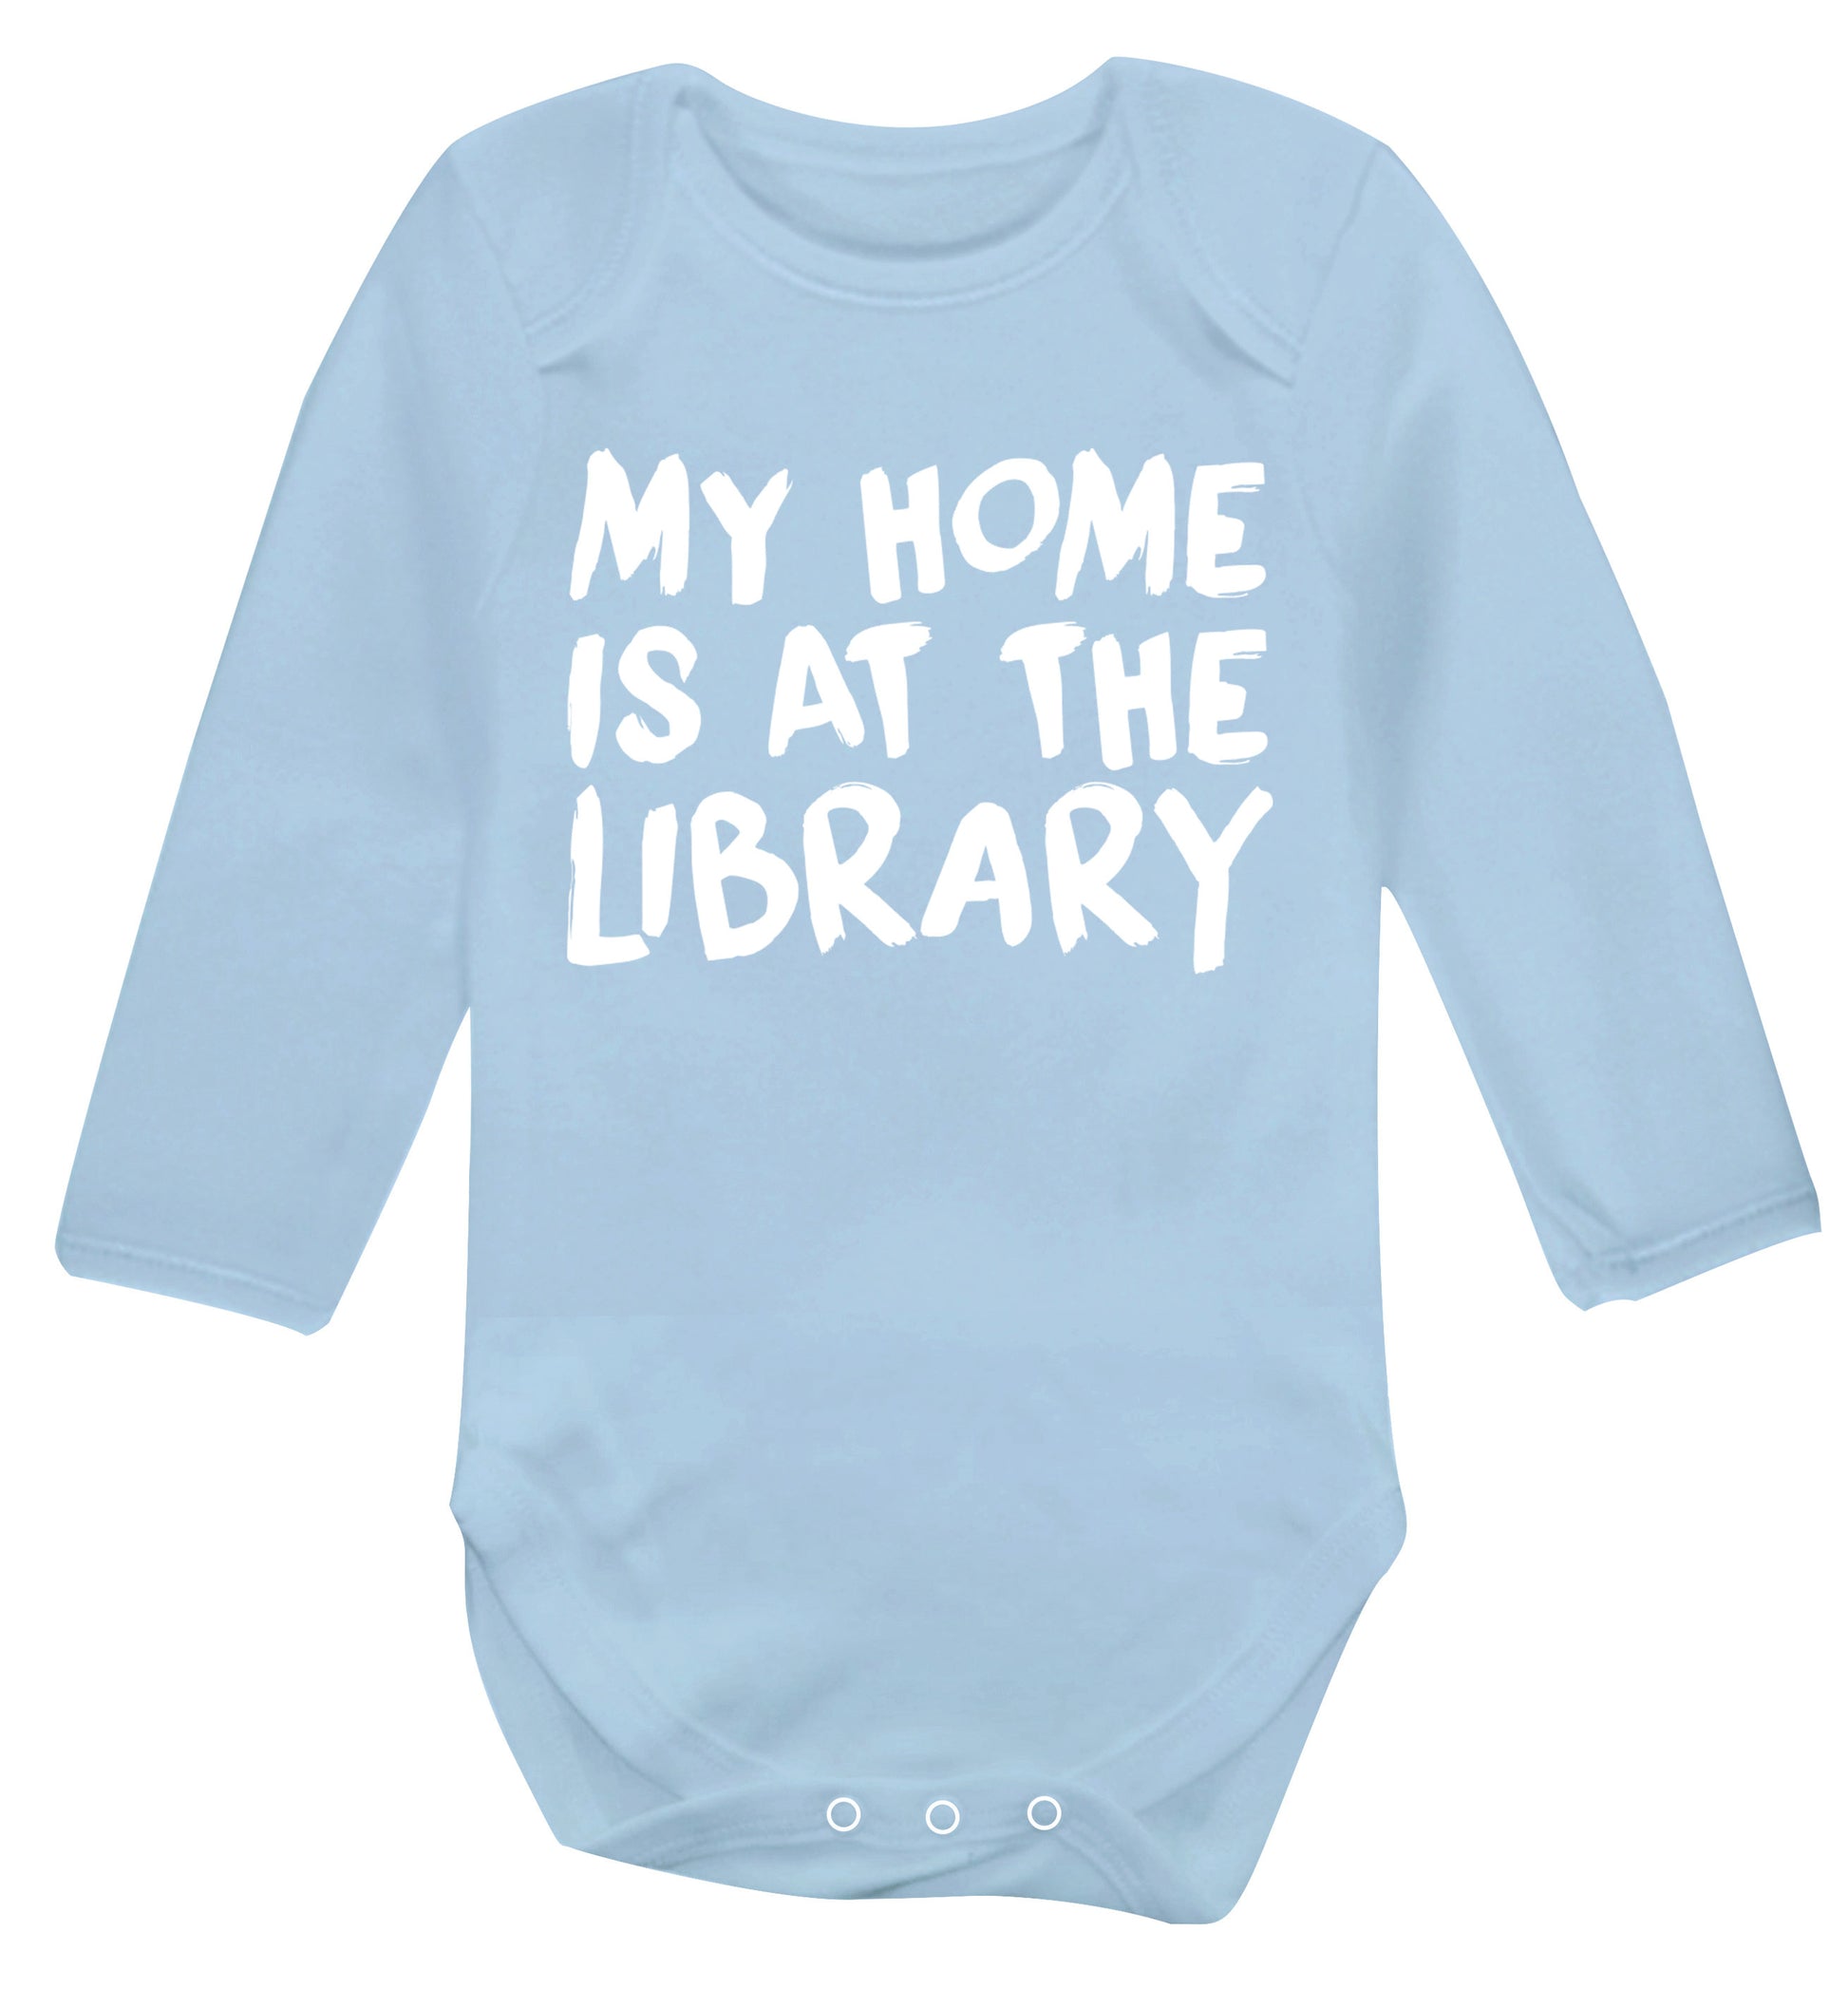 My home is at the library Baby Vest long sleeved pale blue 6-12 months